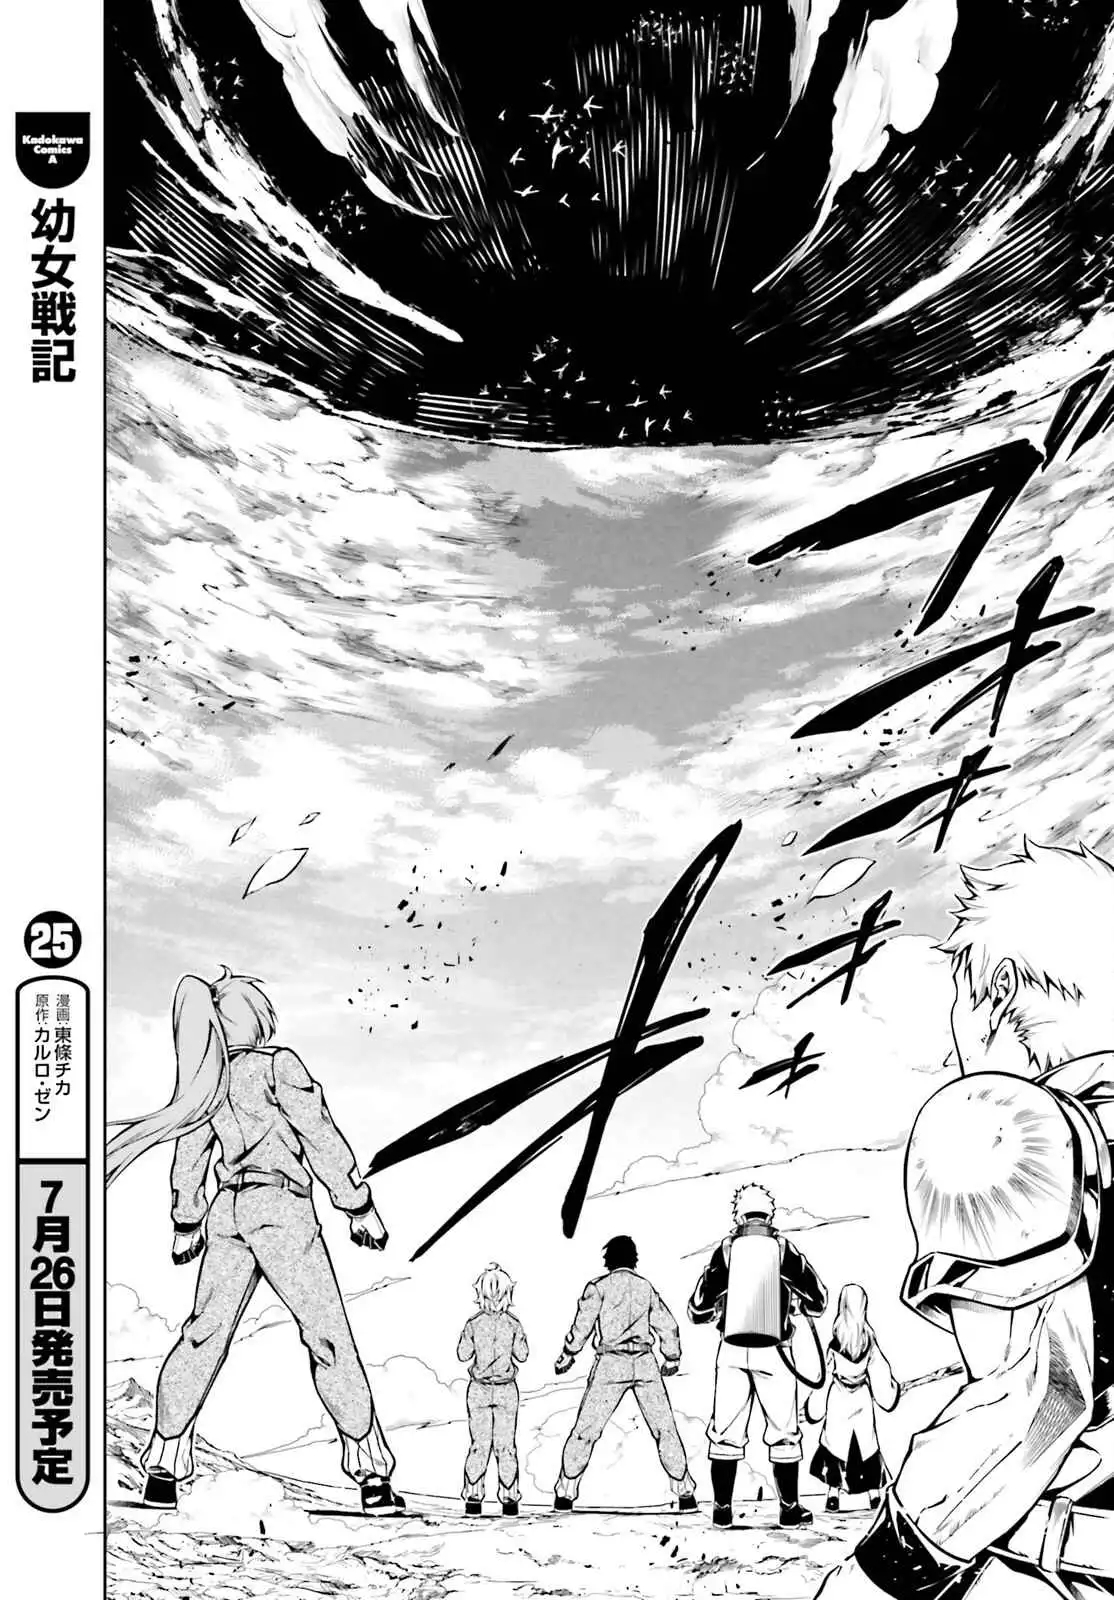 Exterminator [ALL CHAPTERS] Chapter 23